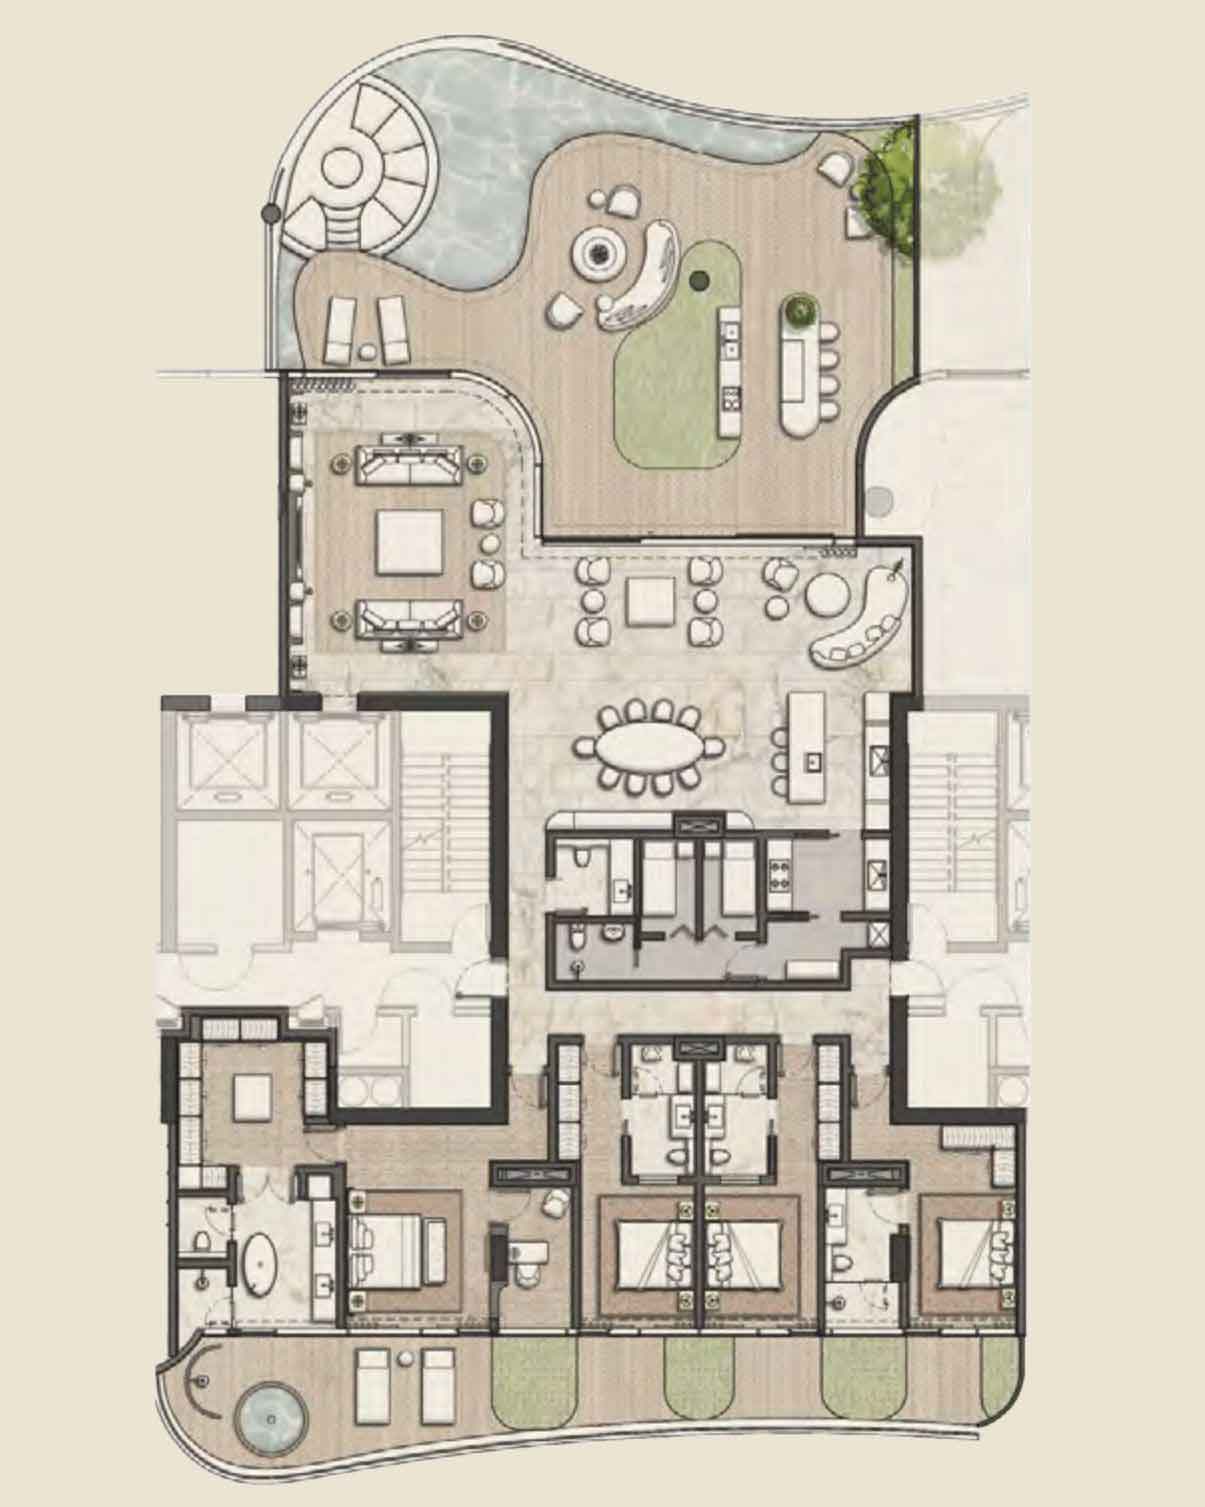 ahs-one-canal-residences-4-bedroom-plan